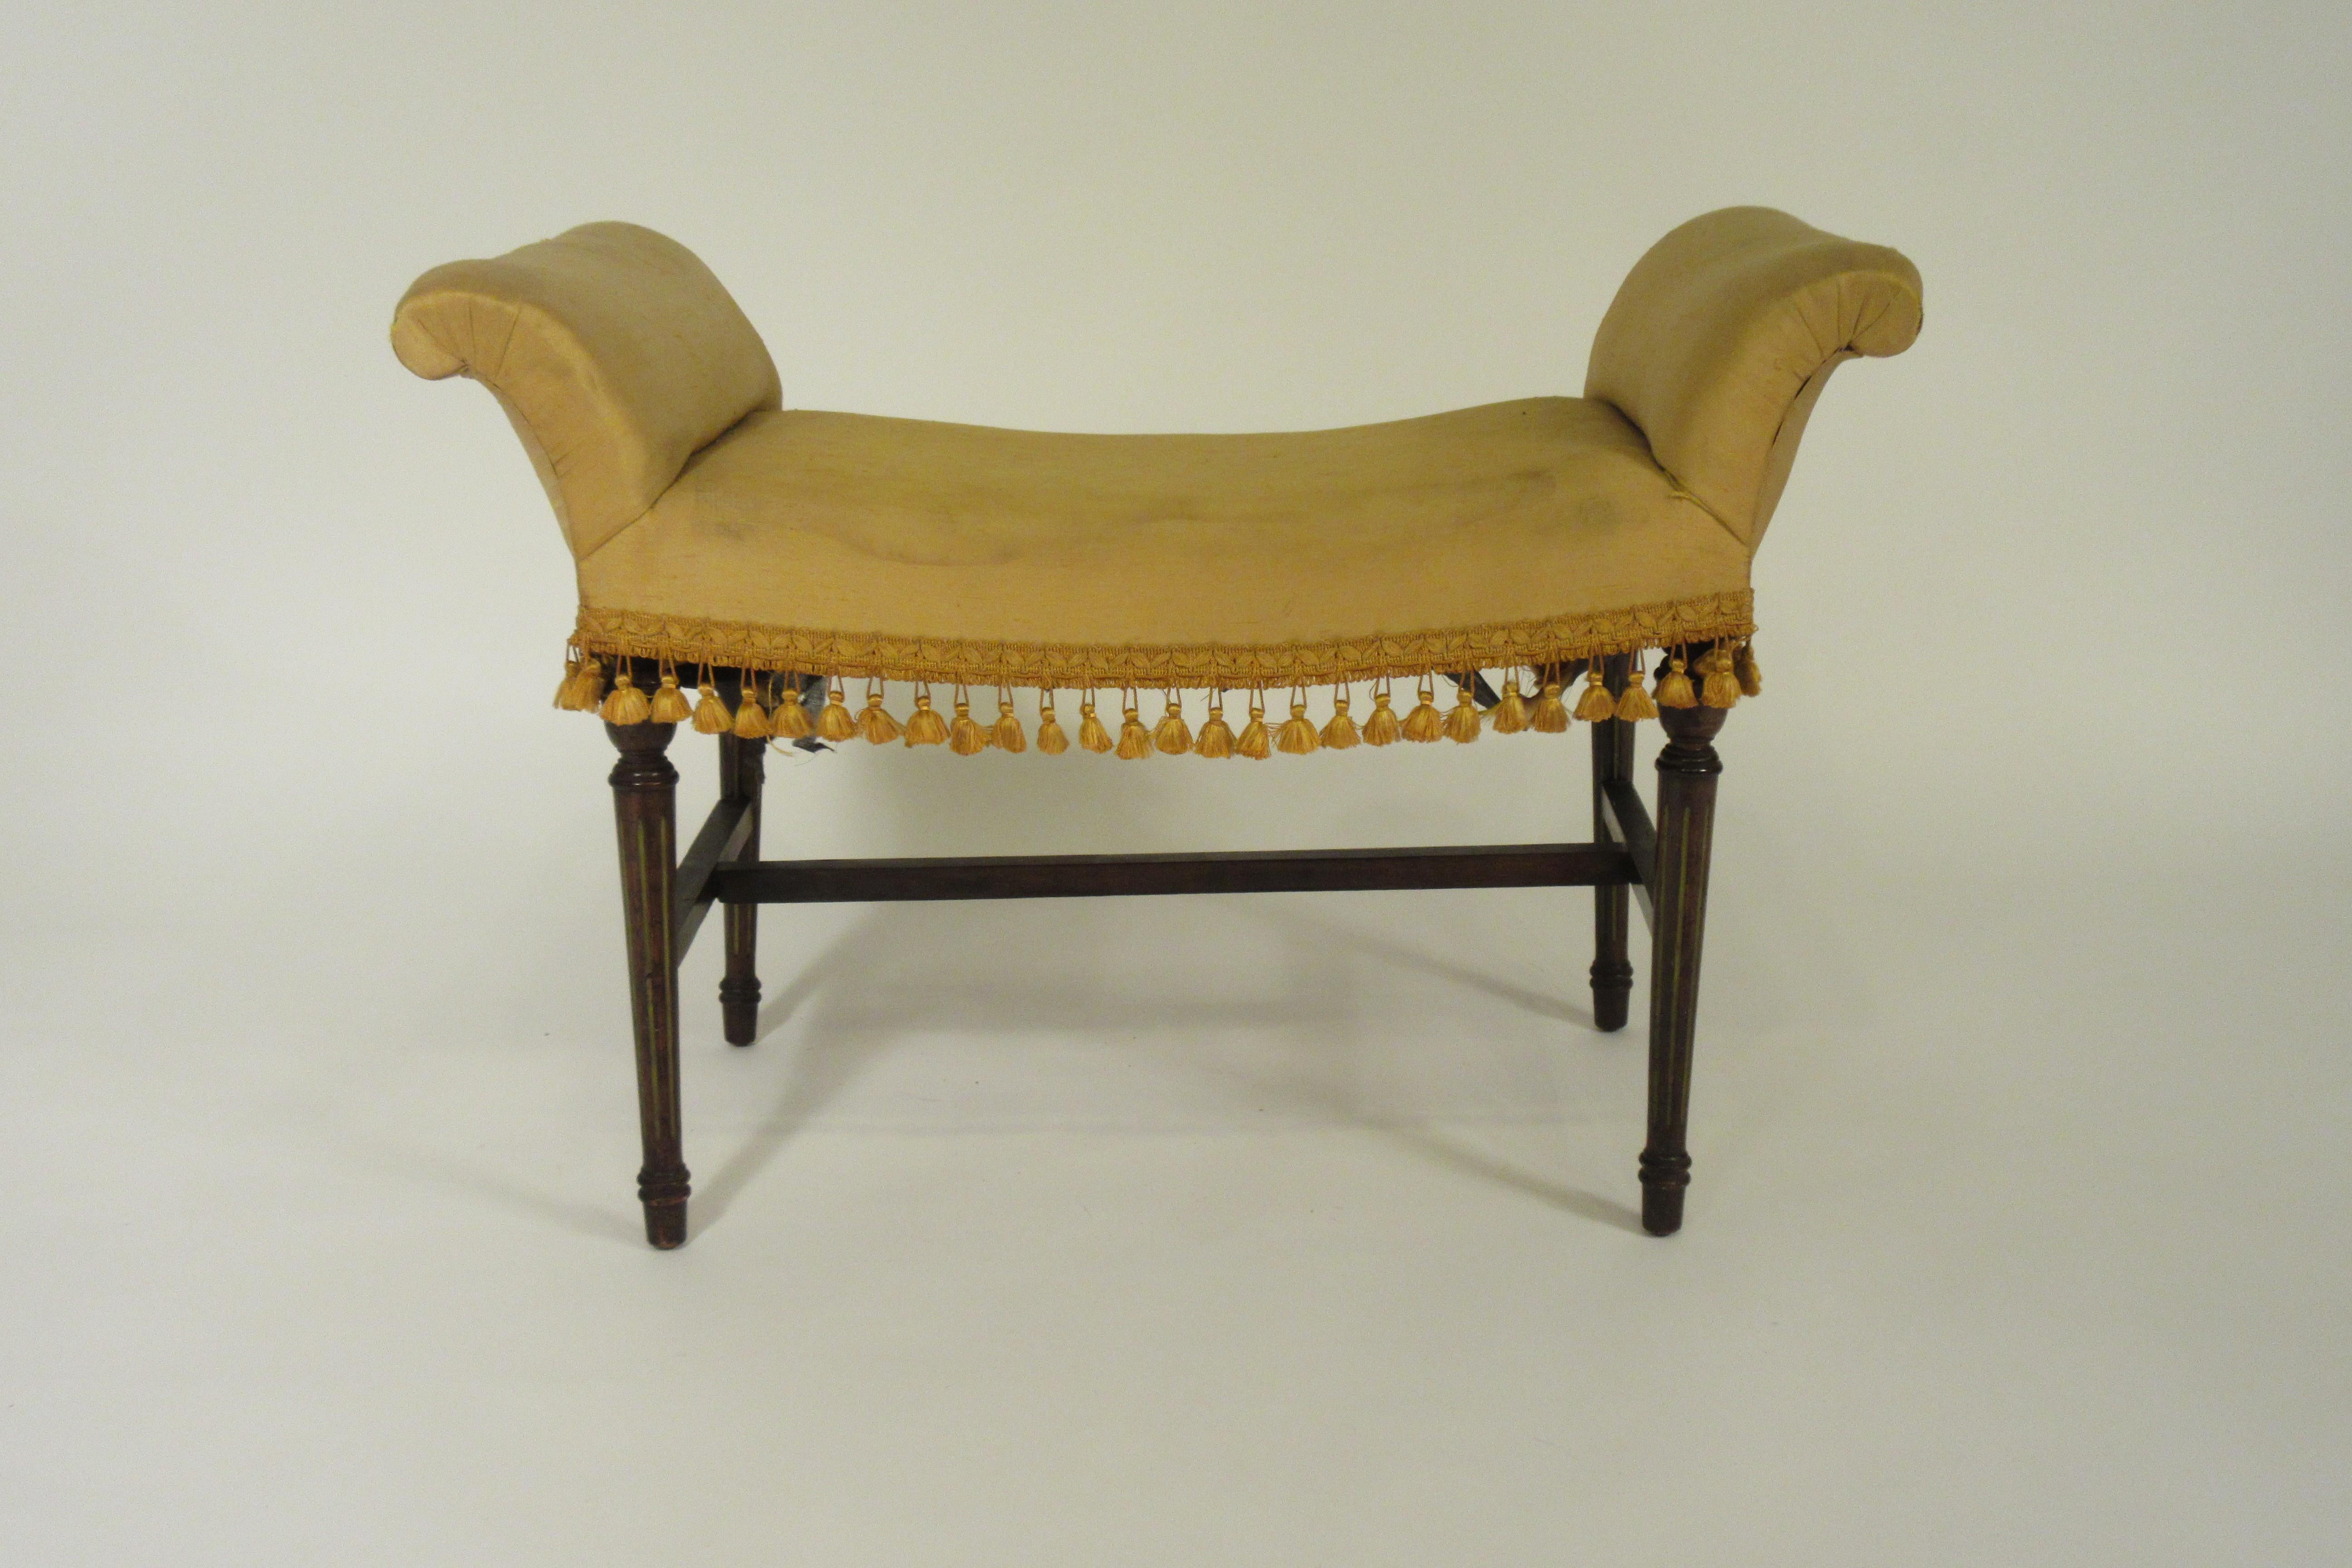 1920s scrolled arm bench. Has original upholstery, needs to be reupholstered.